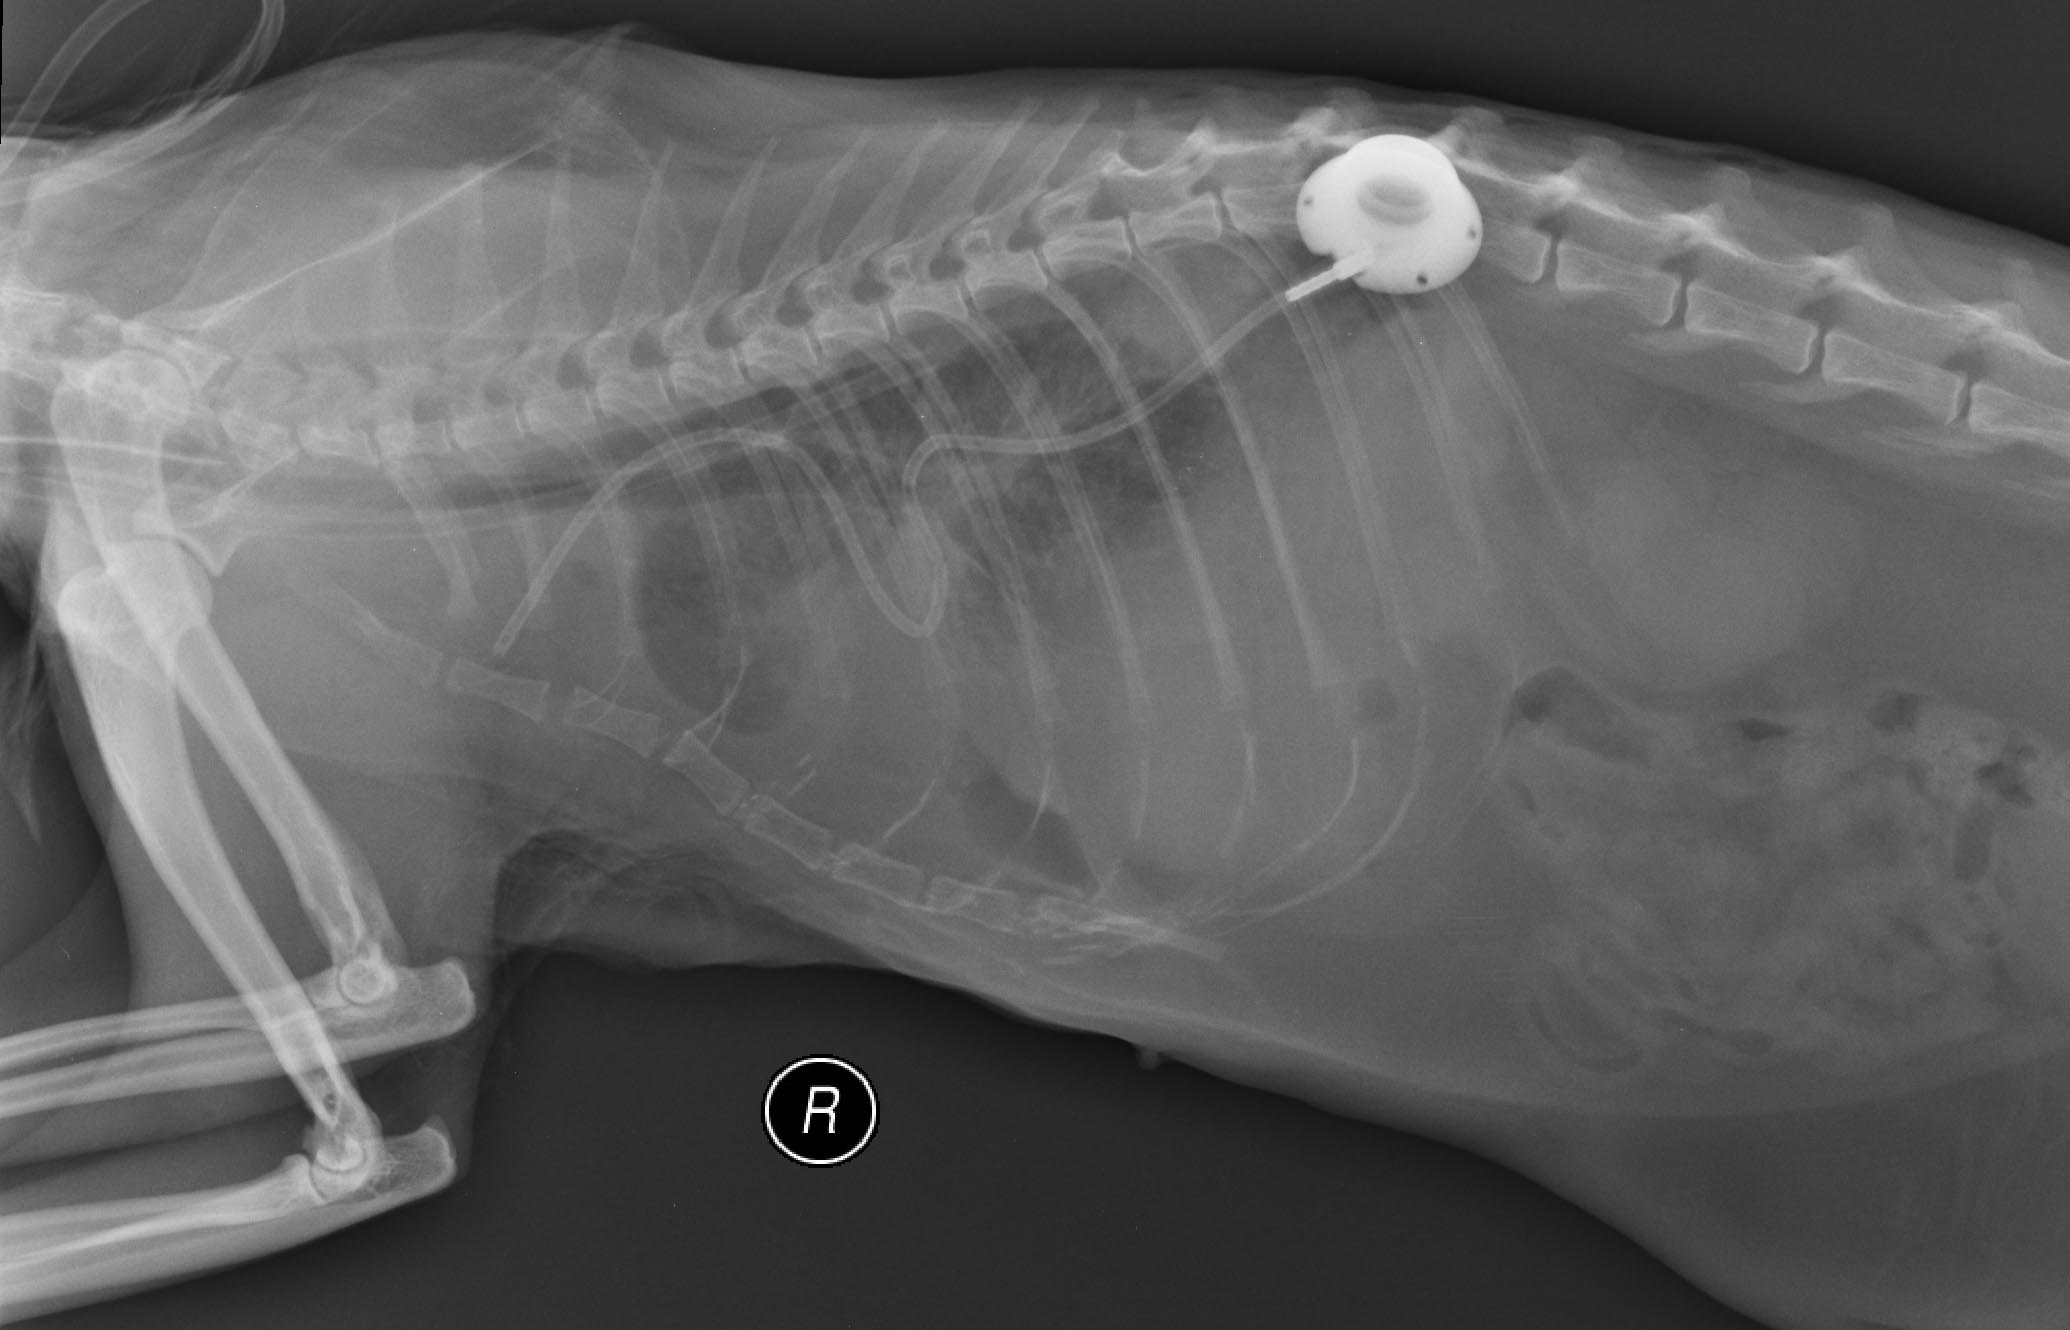 A pleuro-port, as seen on these post-surgery radiographs